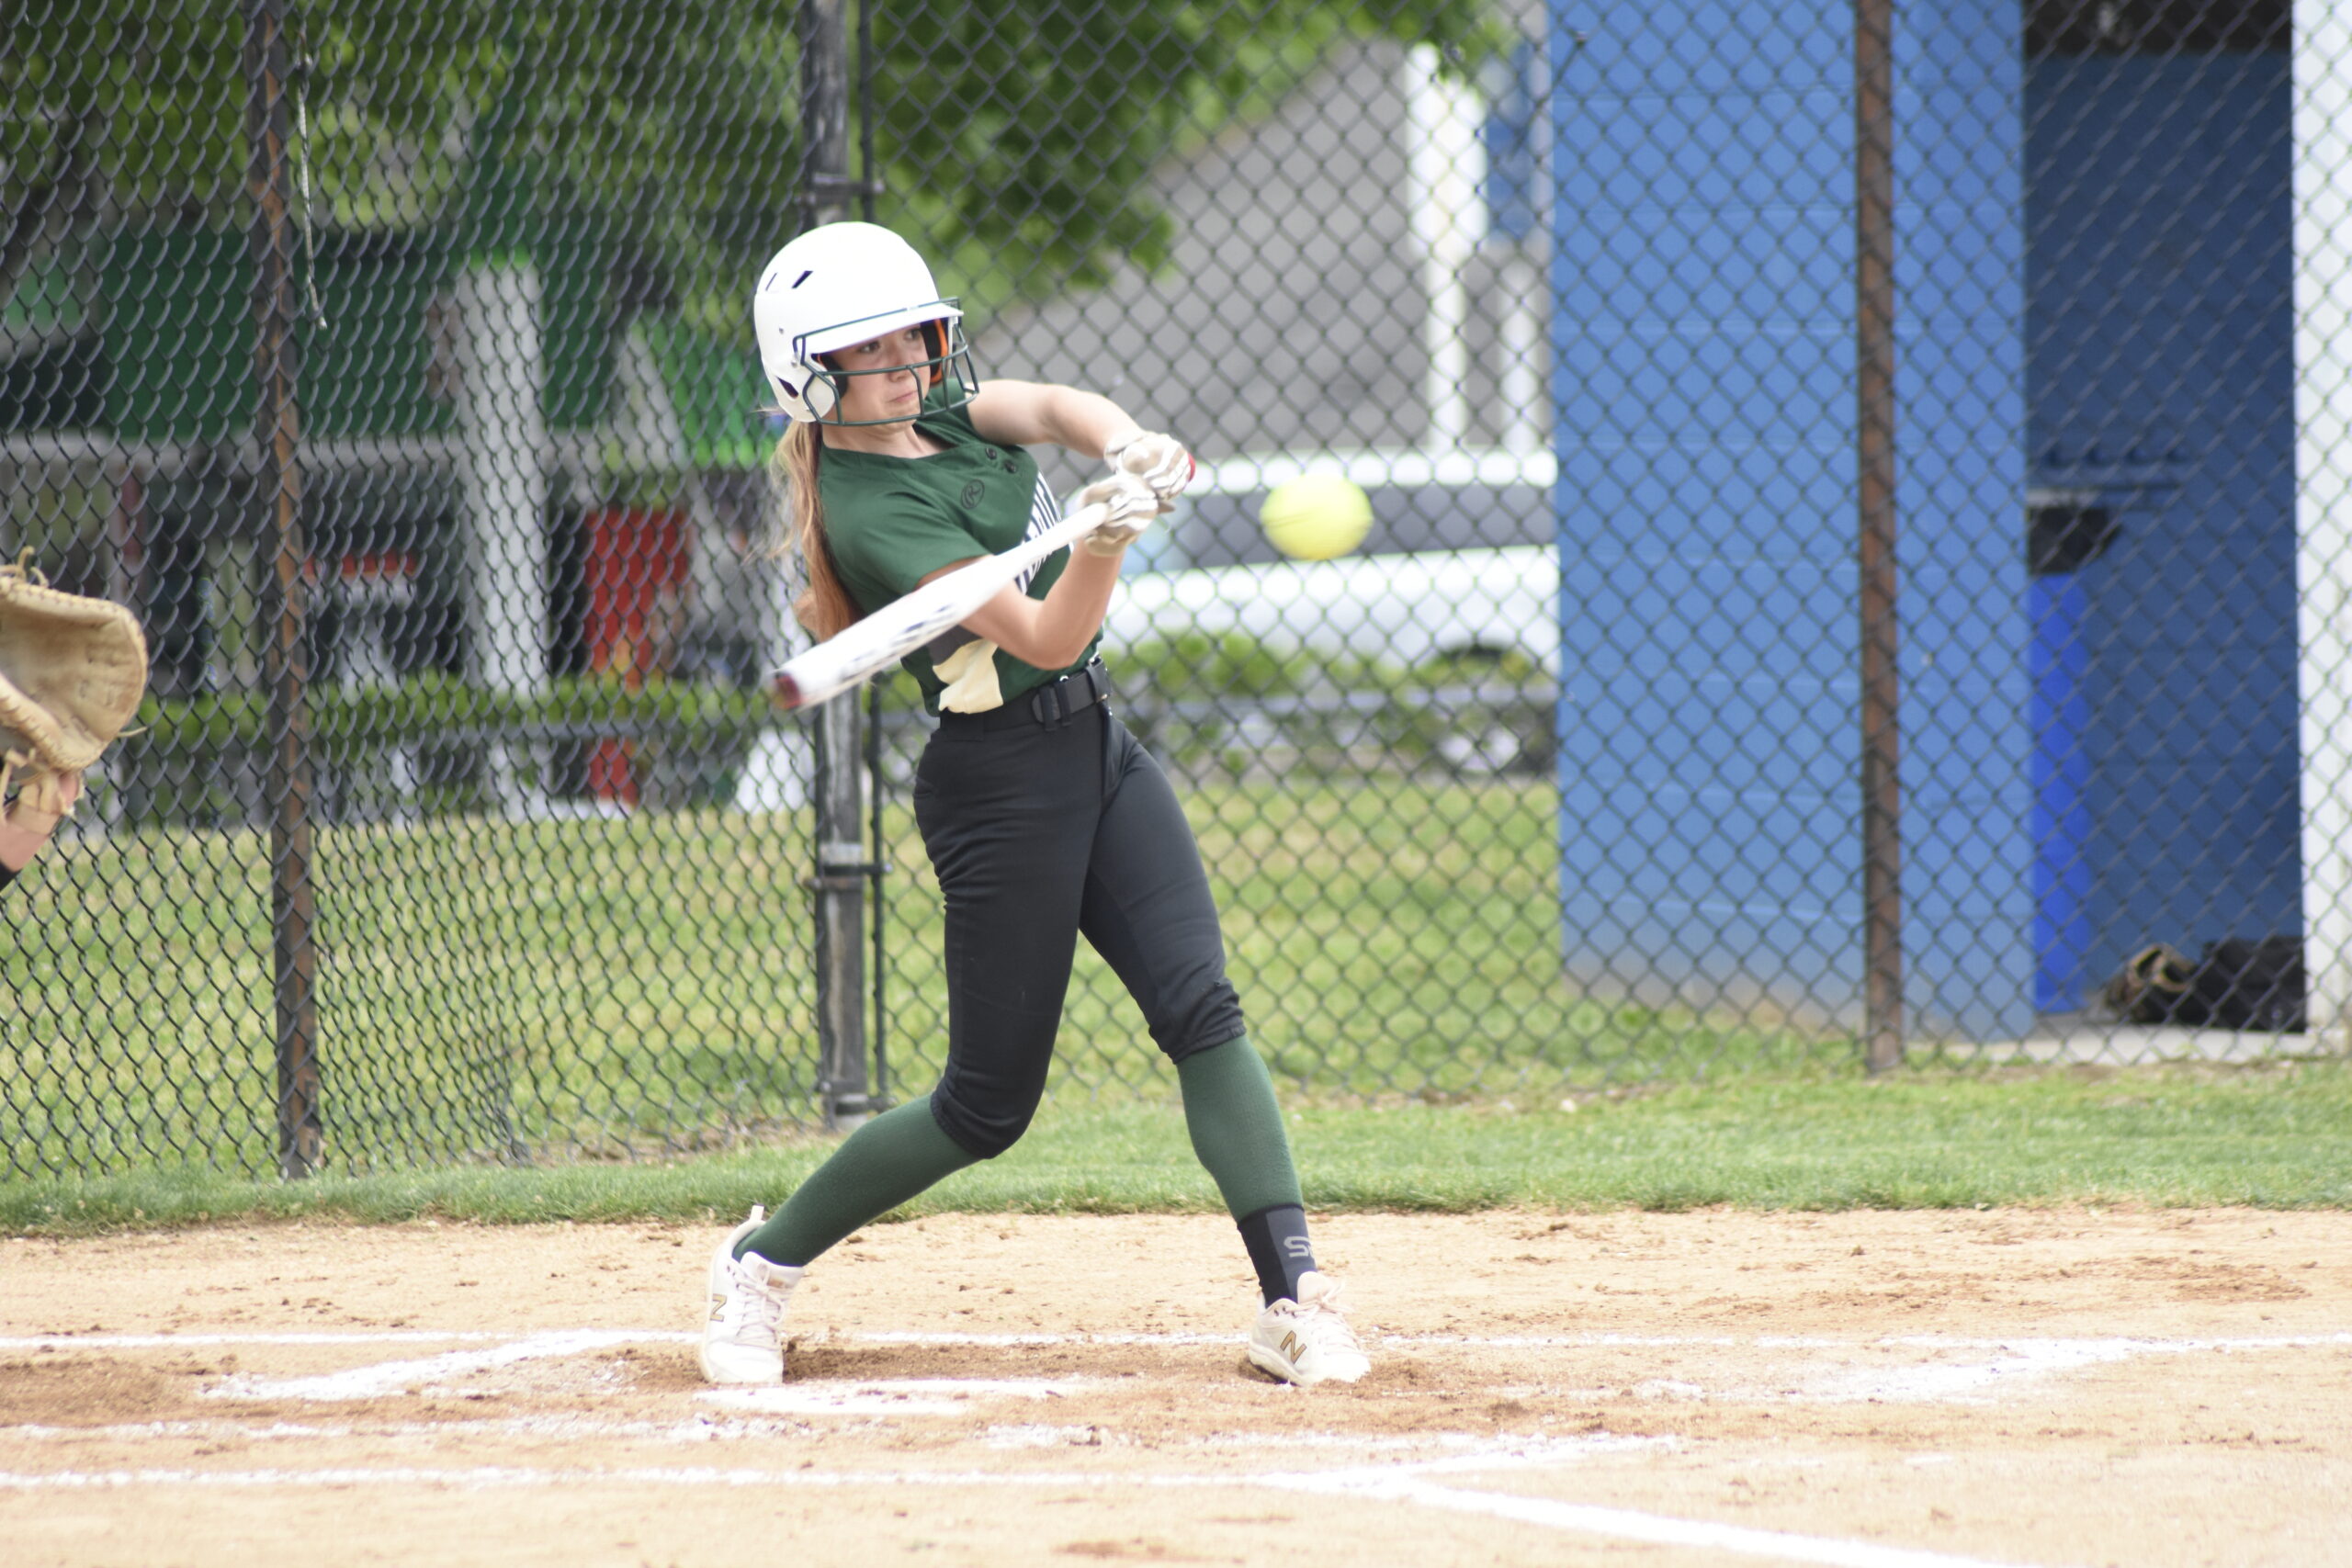 Ashley Erbis led off Friday's game with a double for the Hurricanes.    DREW BUDD